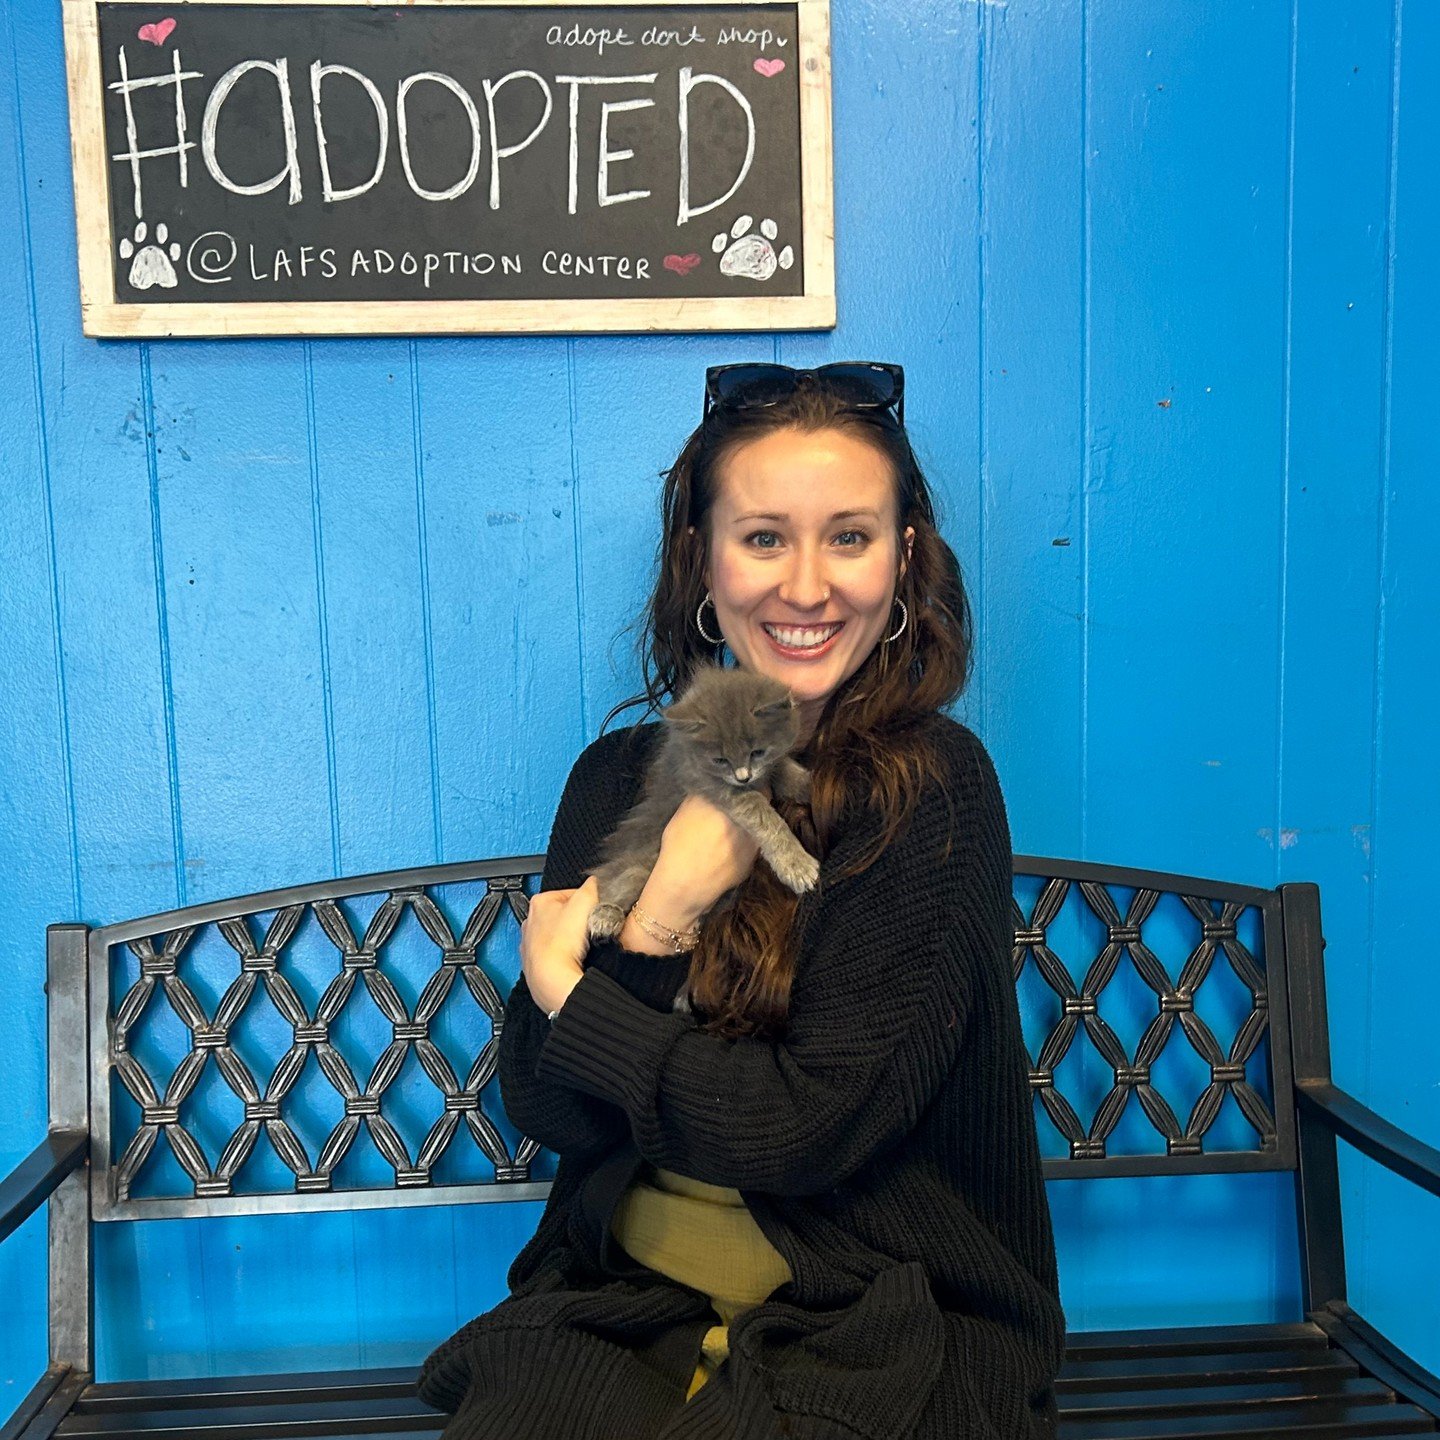 Waldorf, now Haides, has been #adopted‼️